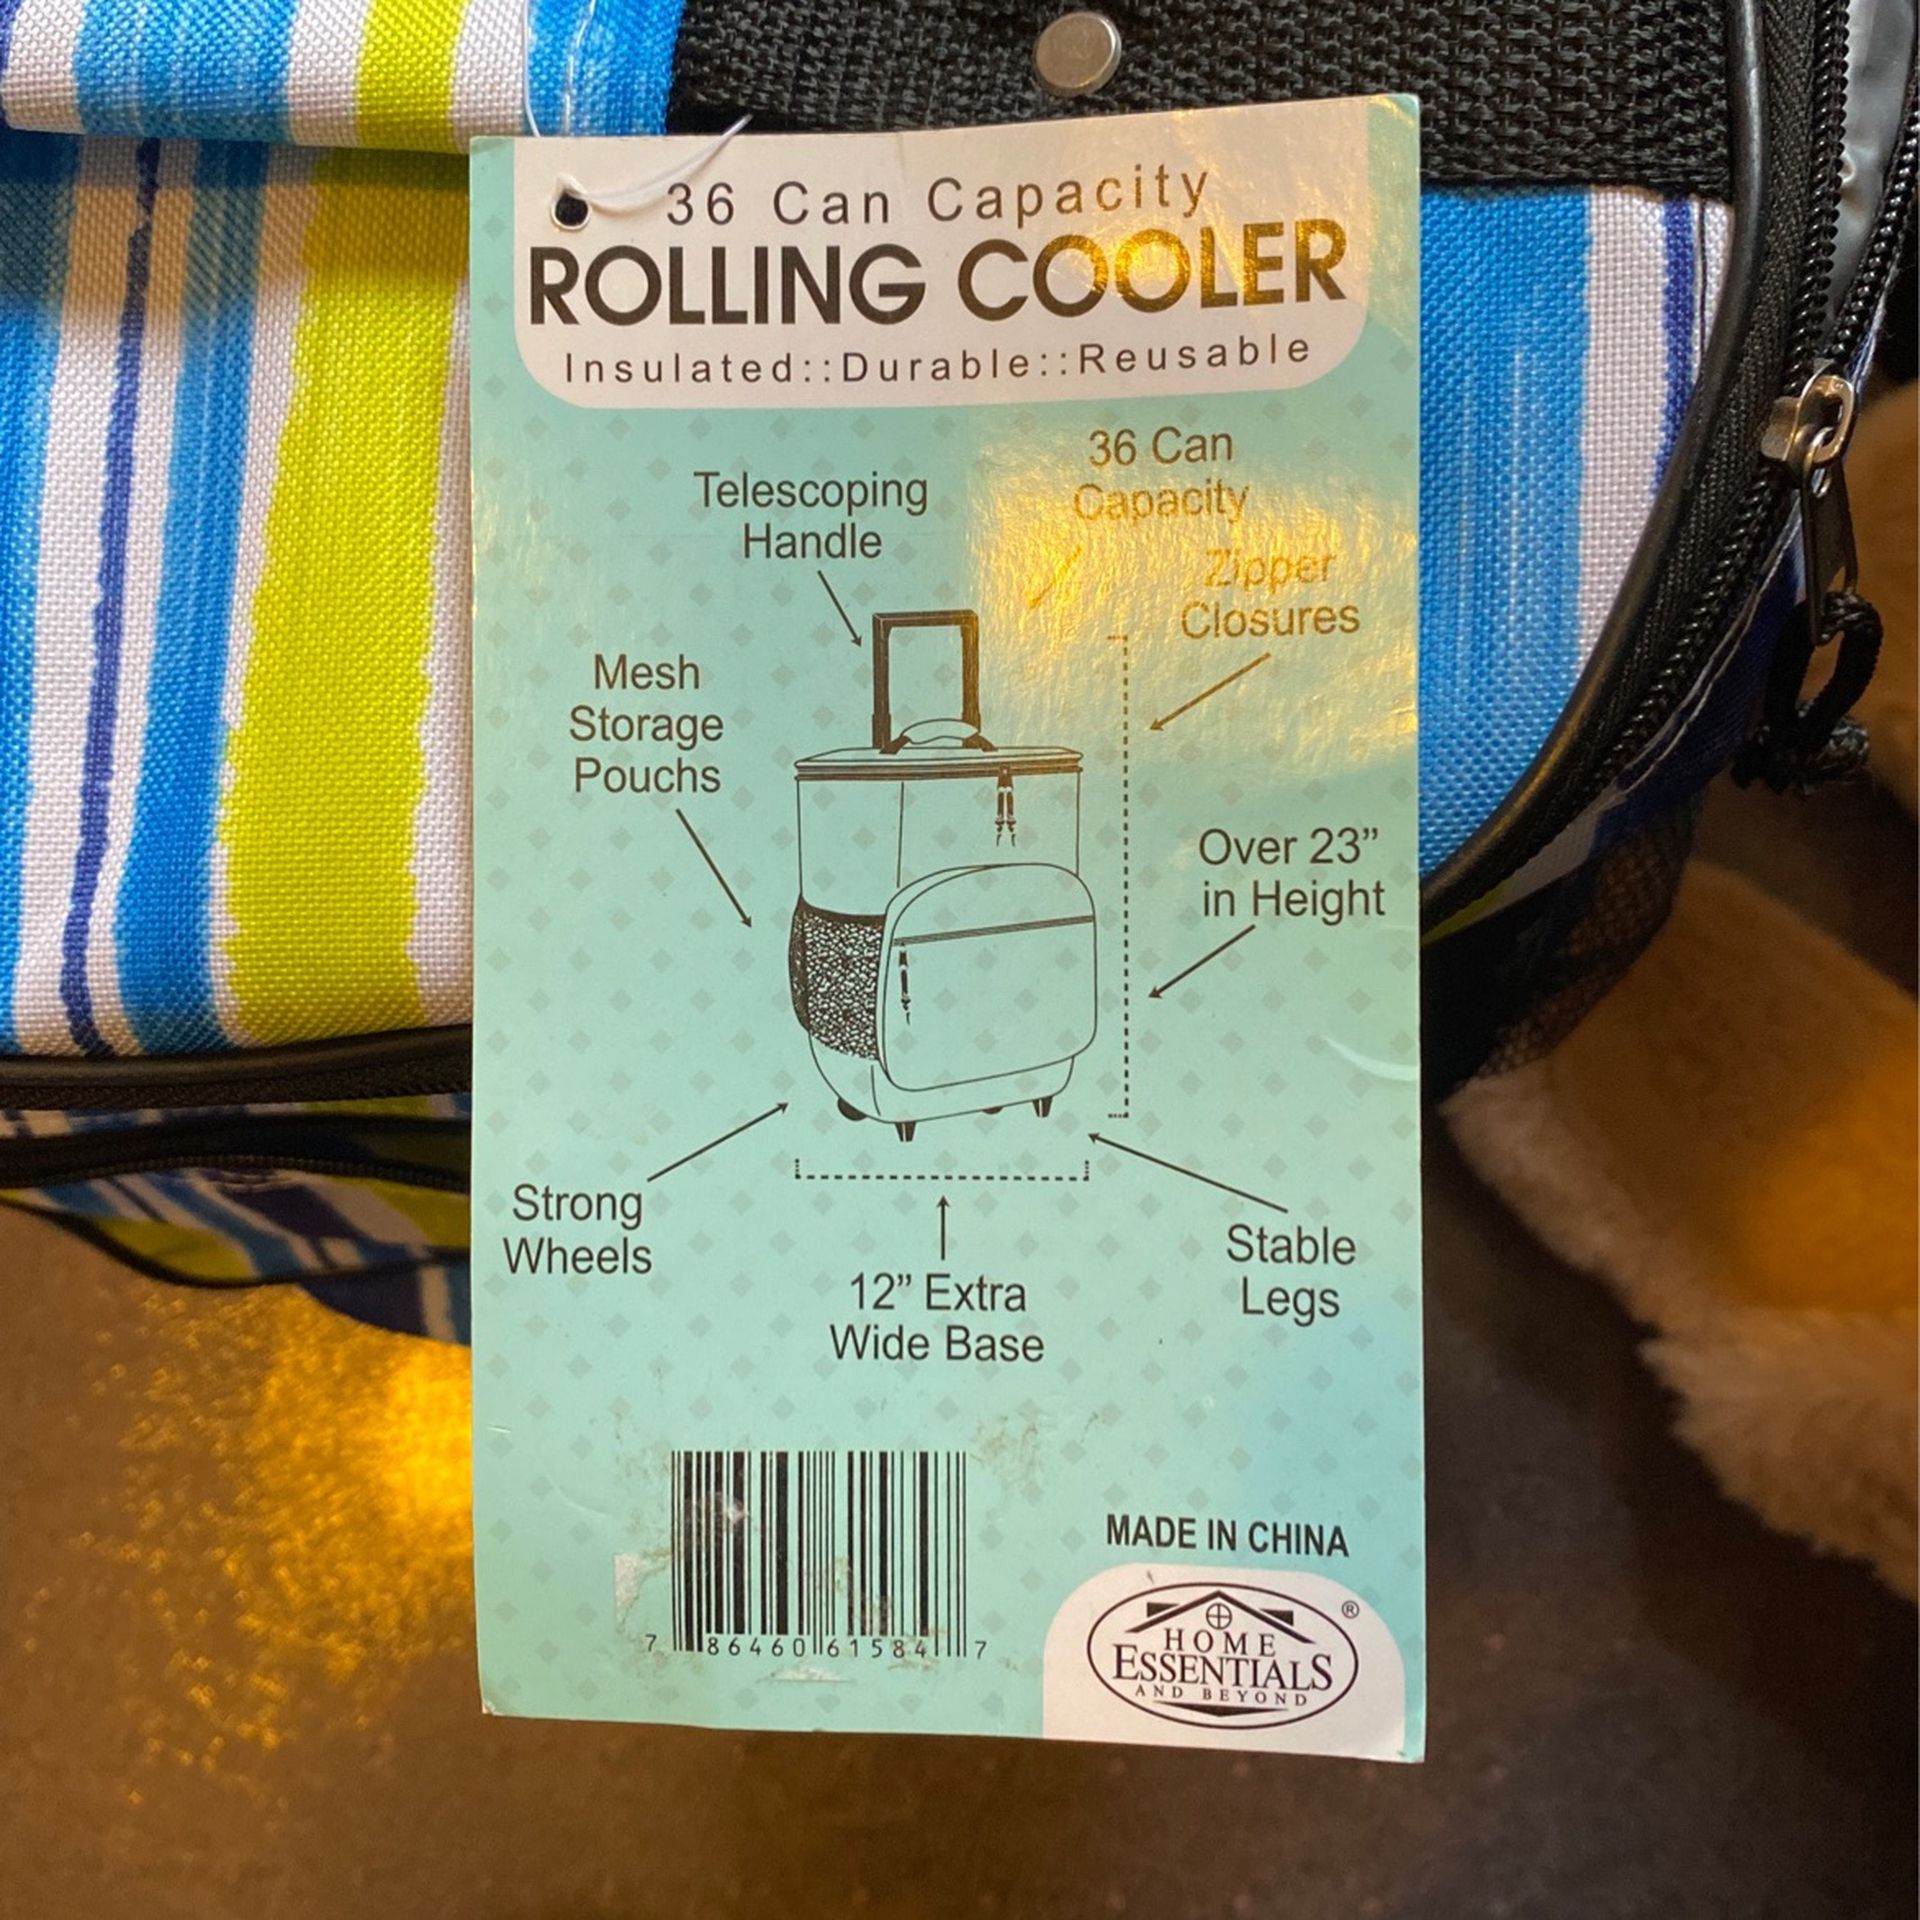 Rolling Cooler 36 Can Capacity